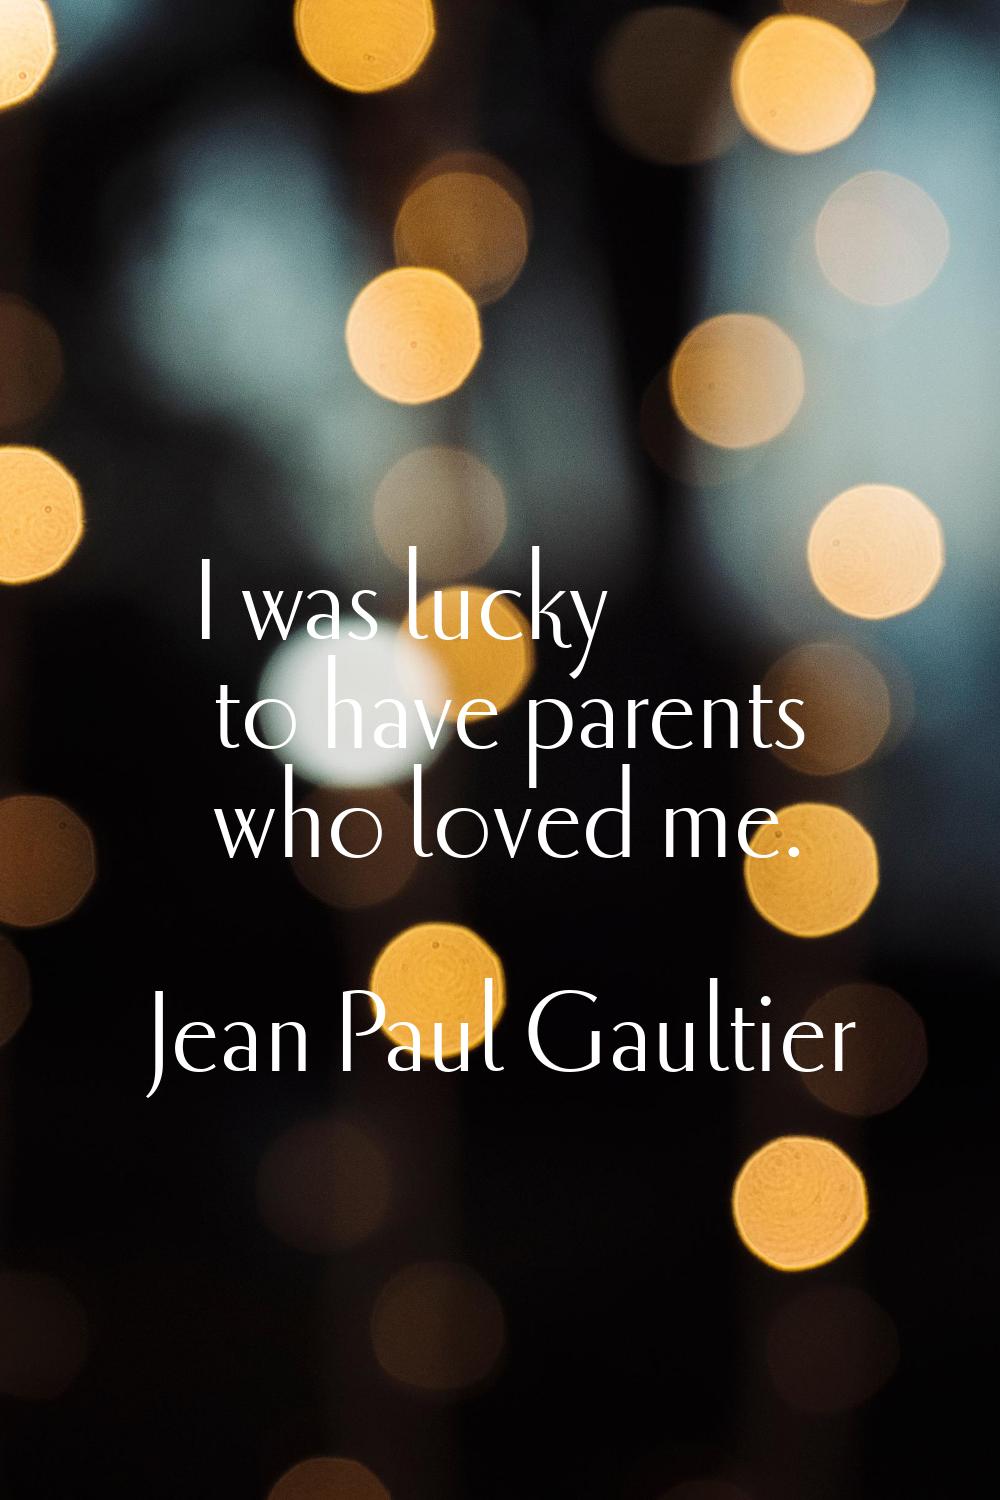 I was lucky to have parents who loved me.